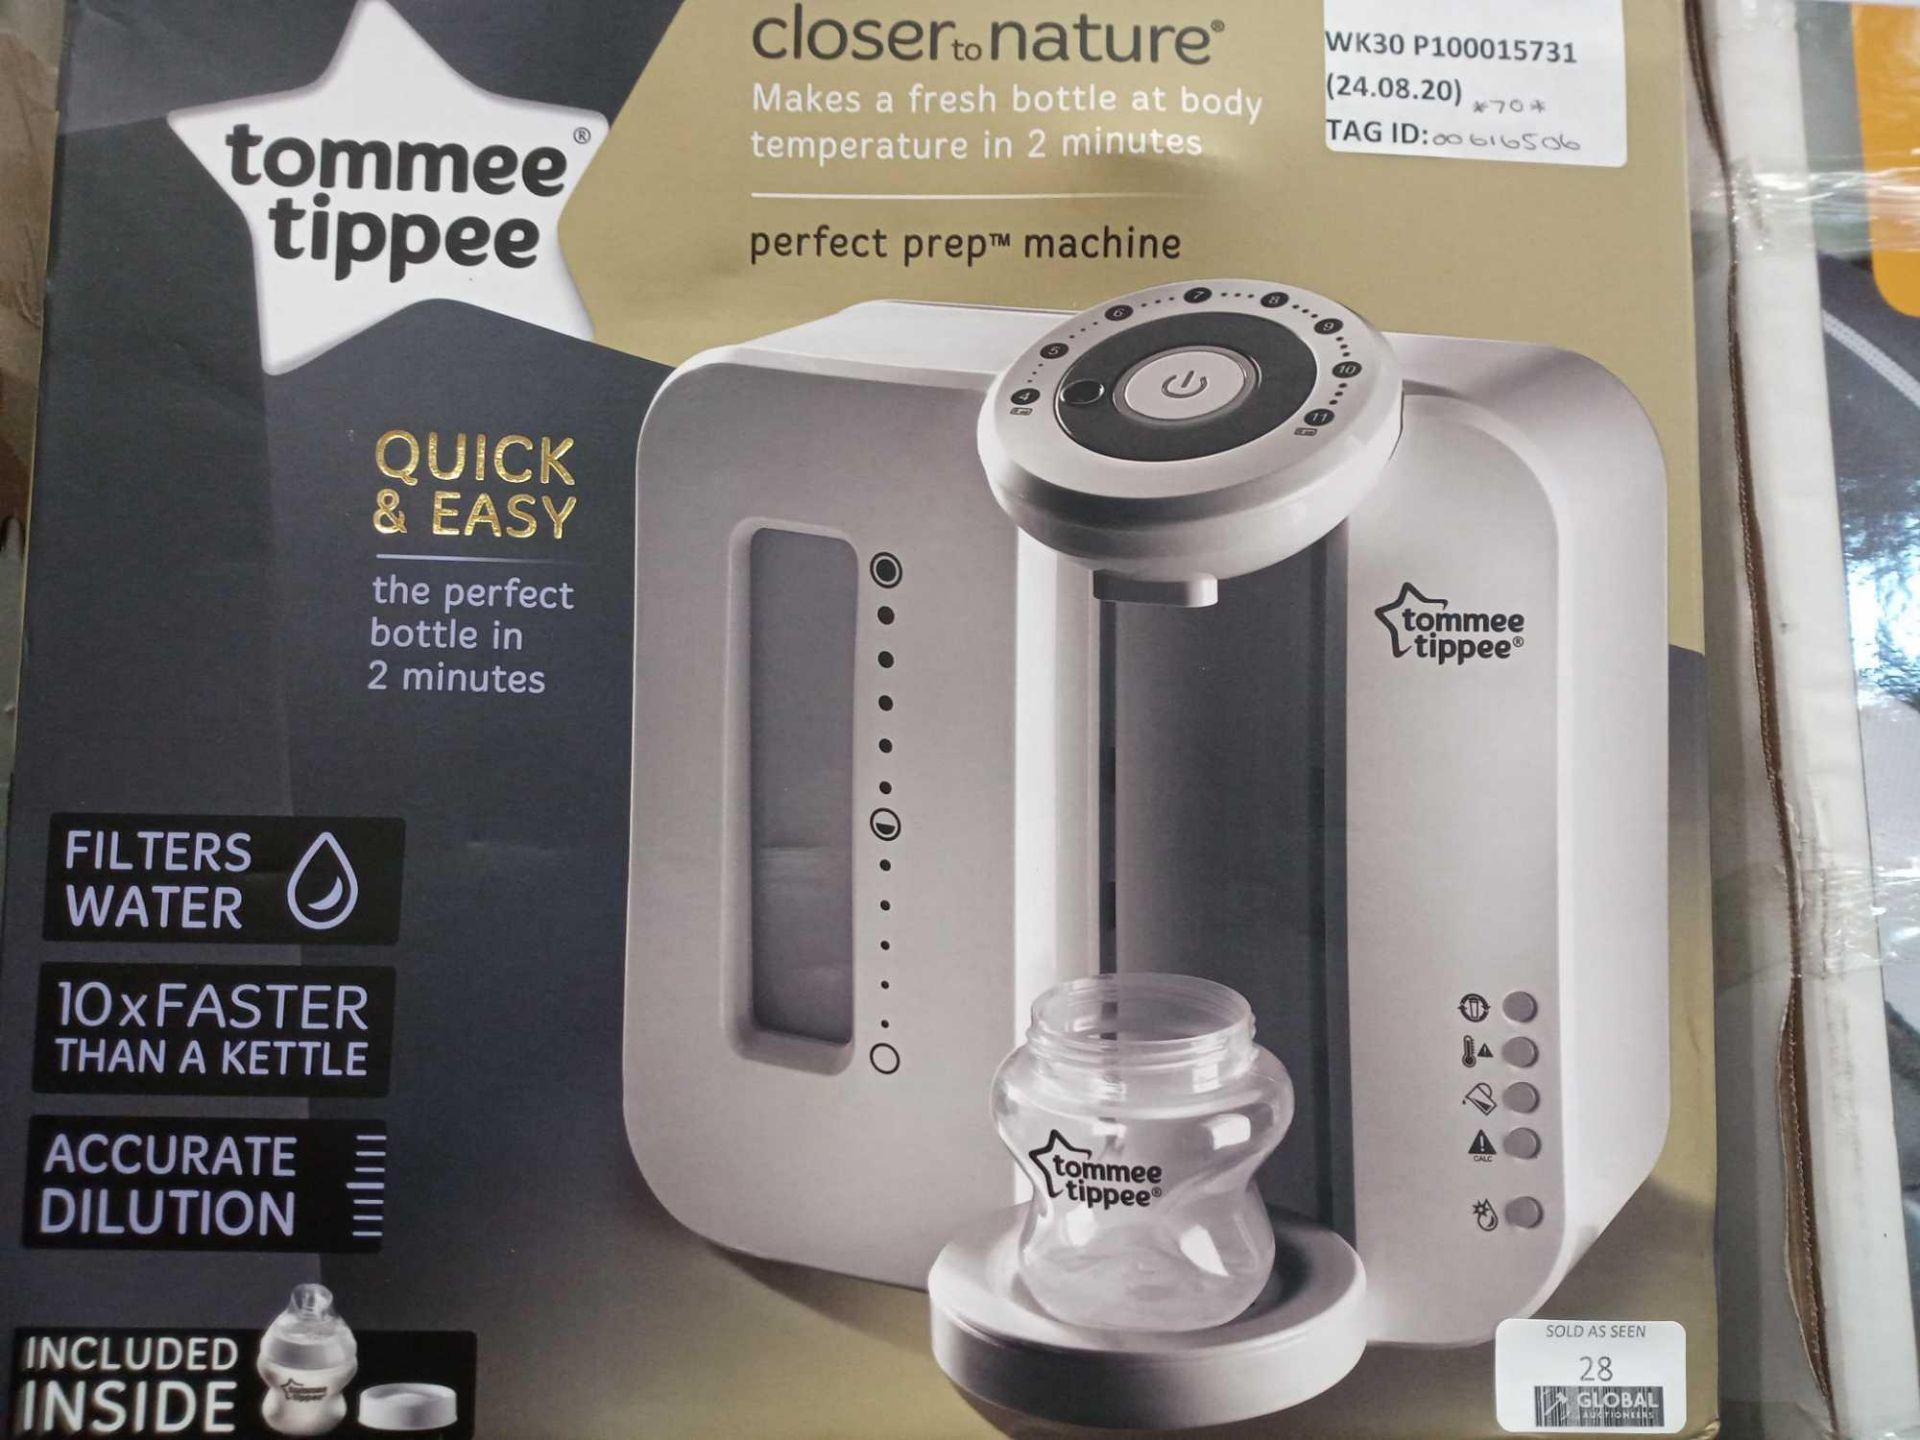 Rrp £70 Boxed Tommee Tippee Closer To Nature Perfect Preparation Bottle Warming Station With Built-I